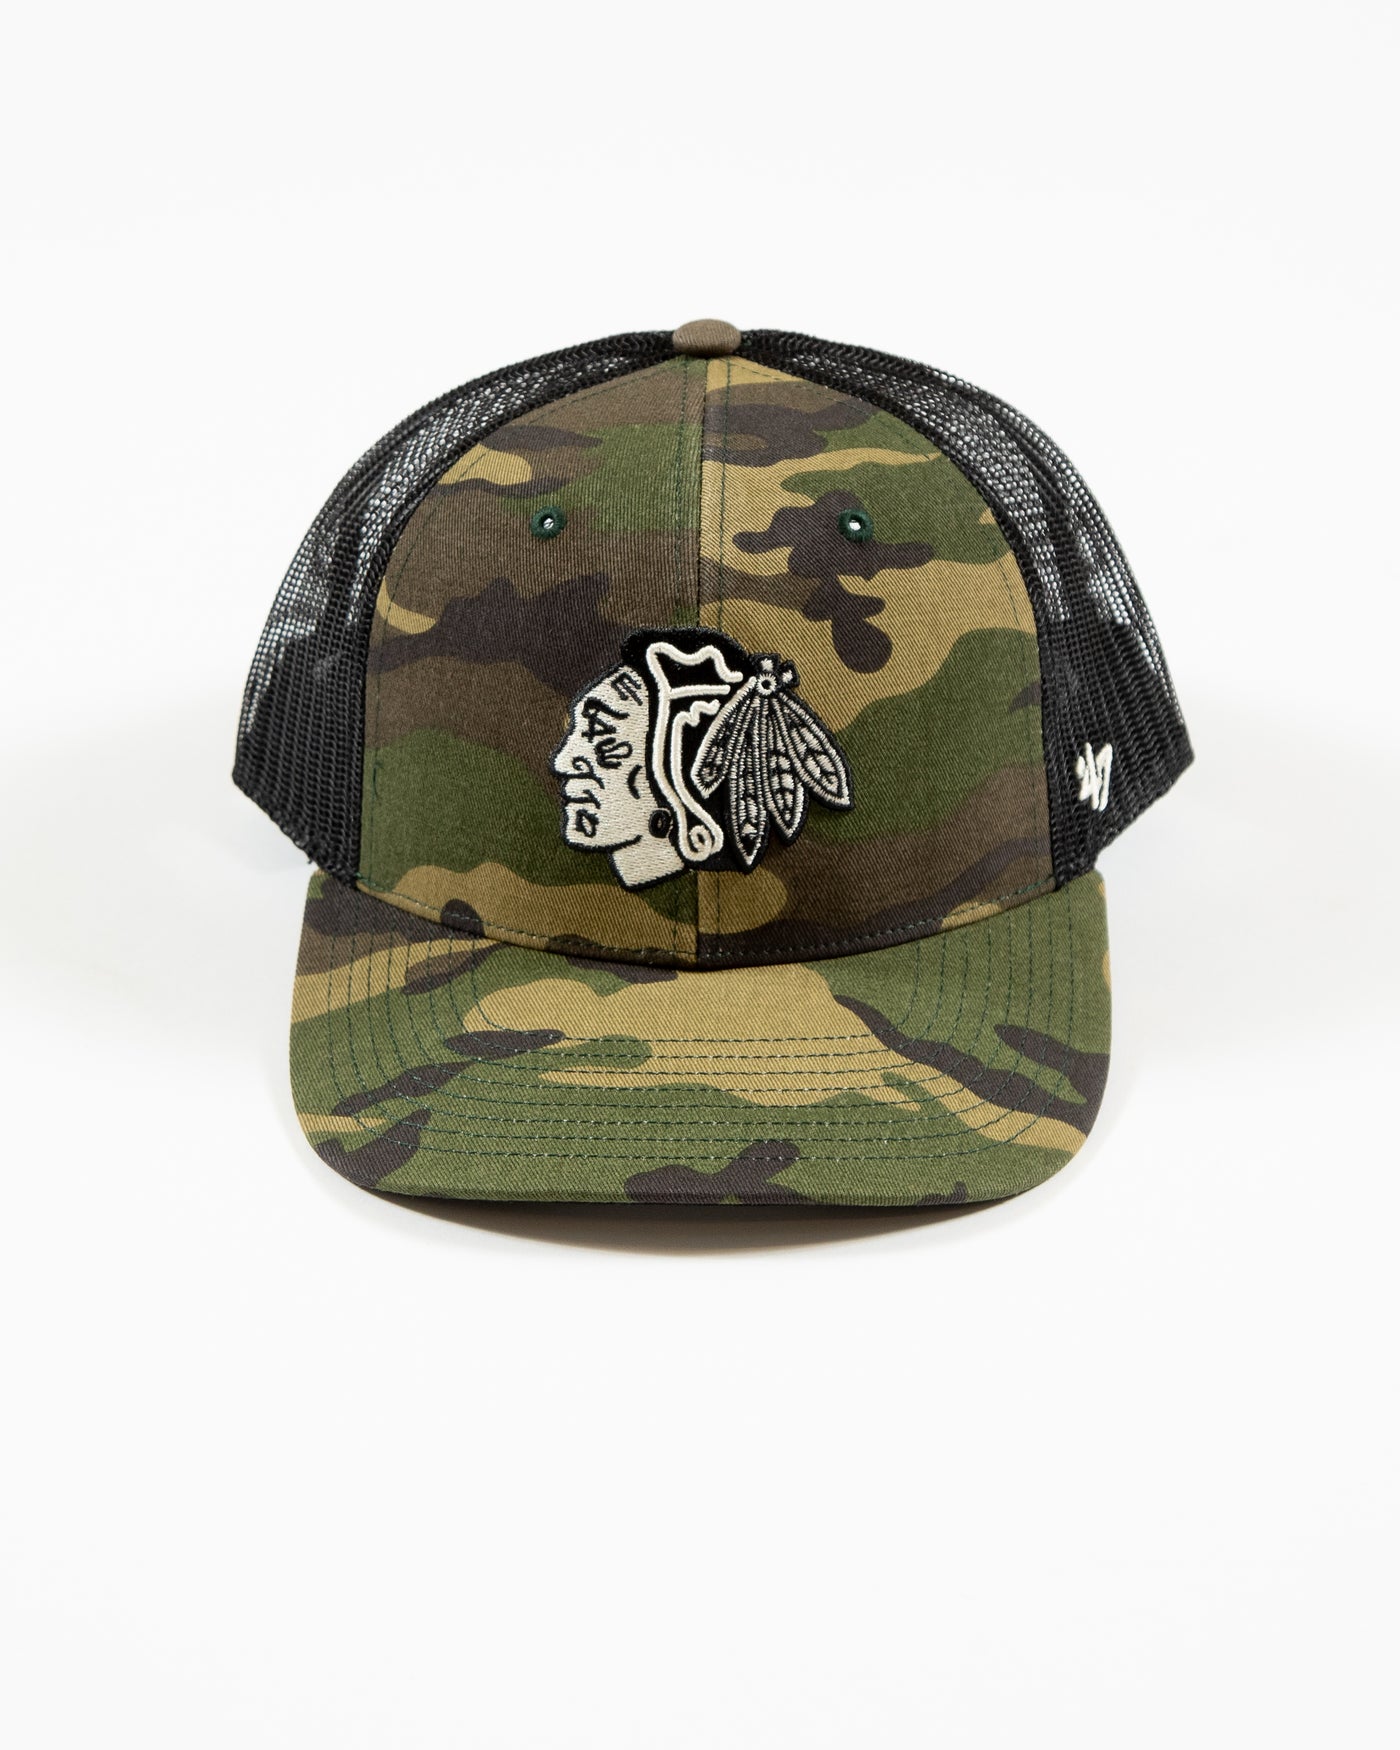 '47 brand camouflage adjustable trucker with Chicago Blackhawks primary logo embroidered on front - front lay flat